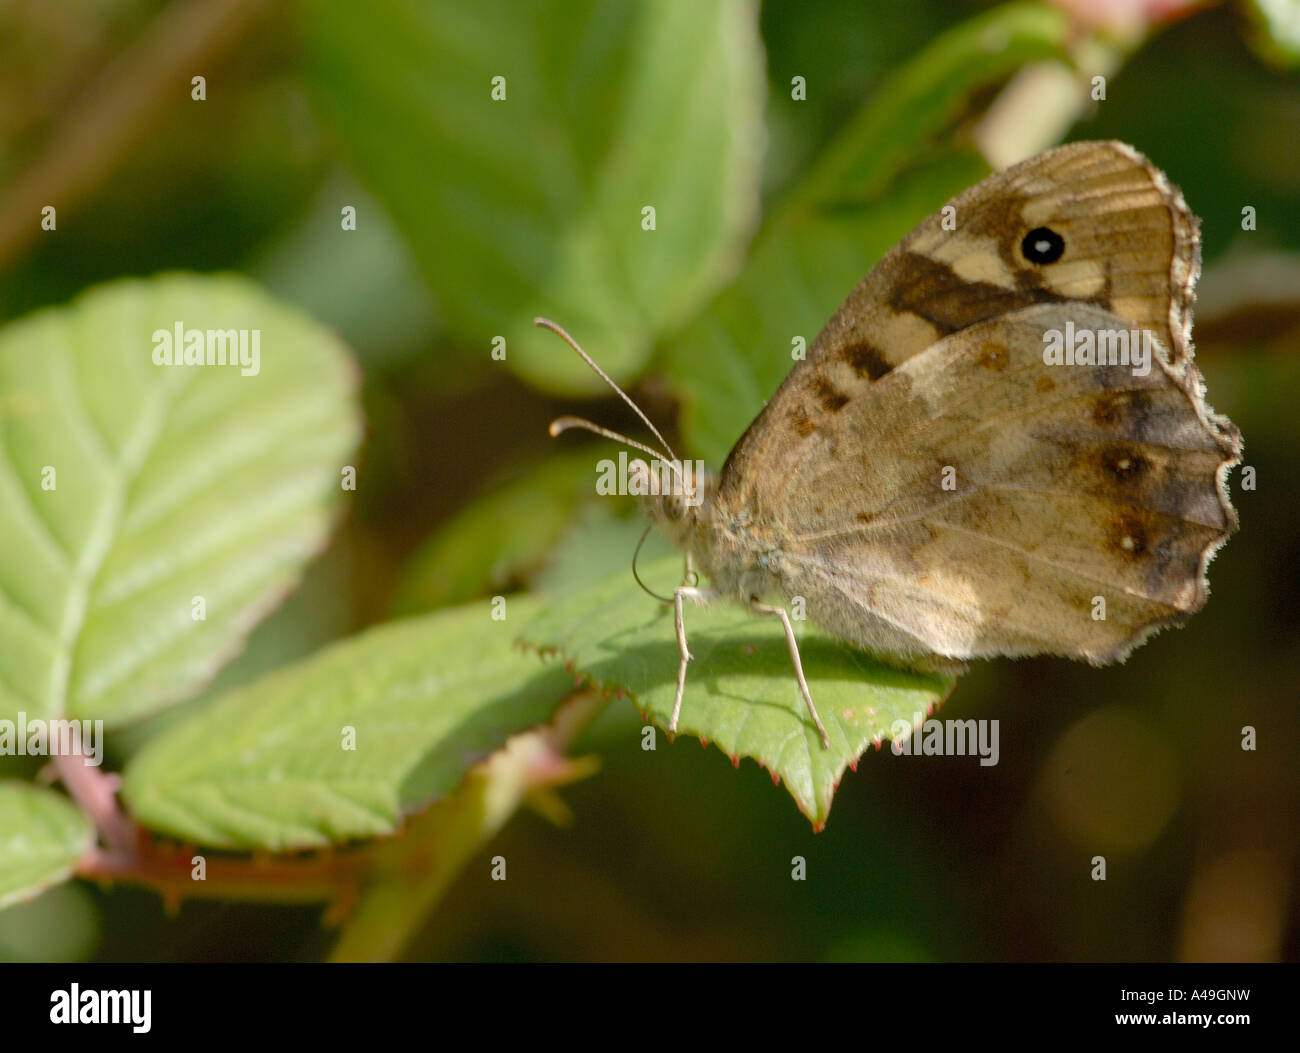 A Speckled Wood butterfly Pararge aegeria rests with closed wings on blackberry leaves Stock Photo